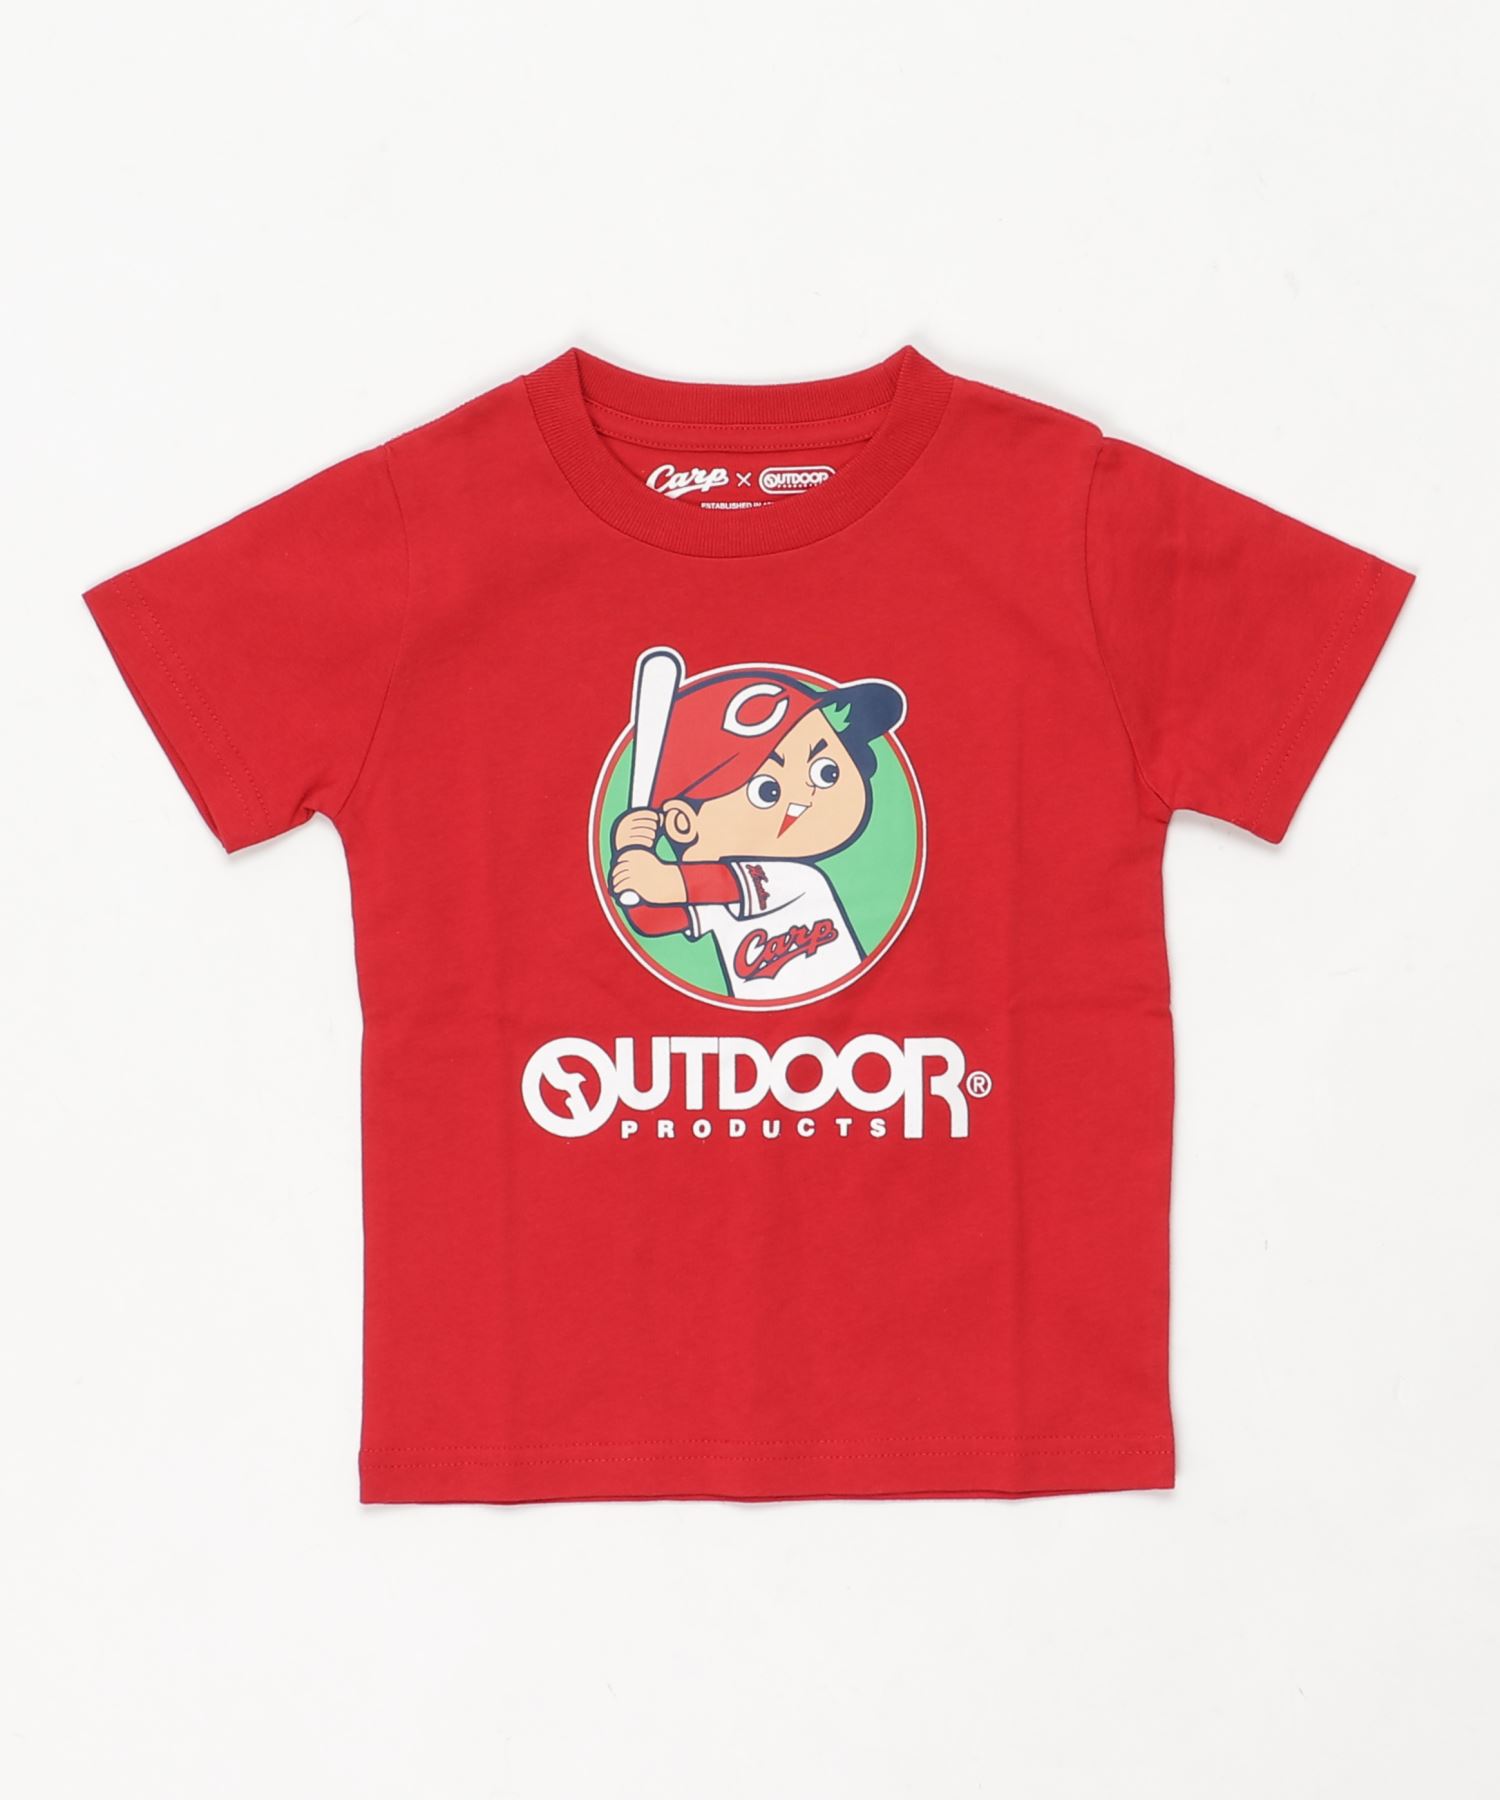 ｋｉｄｓカープコラボｔ１ カープ坊や Outdoor Products Apparel アウトドアプロダクツ Outdoor Products 公式通販サイト